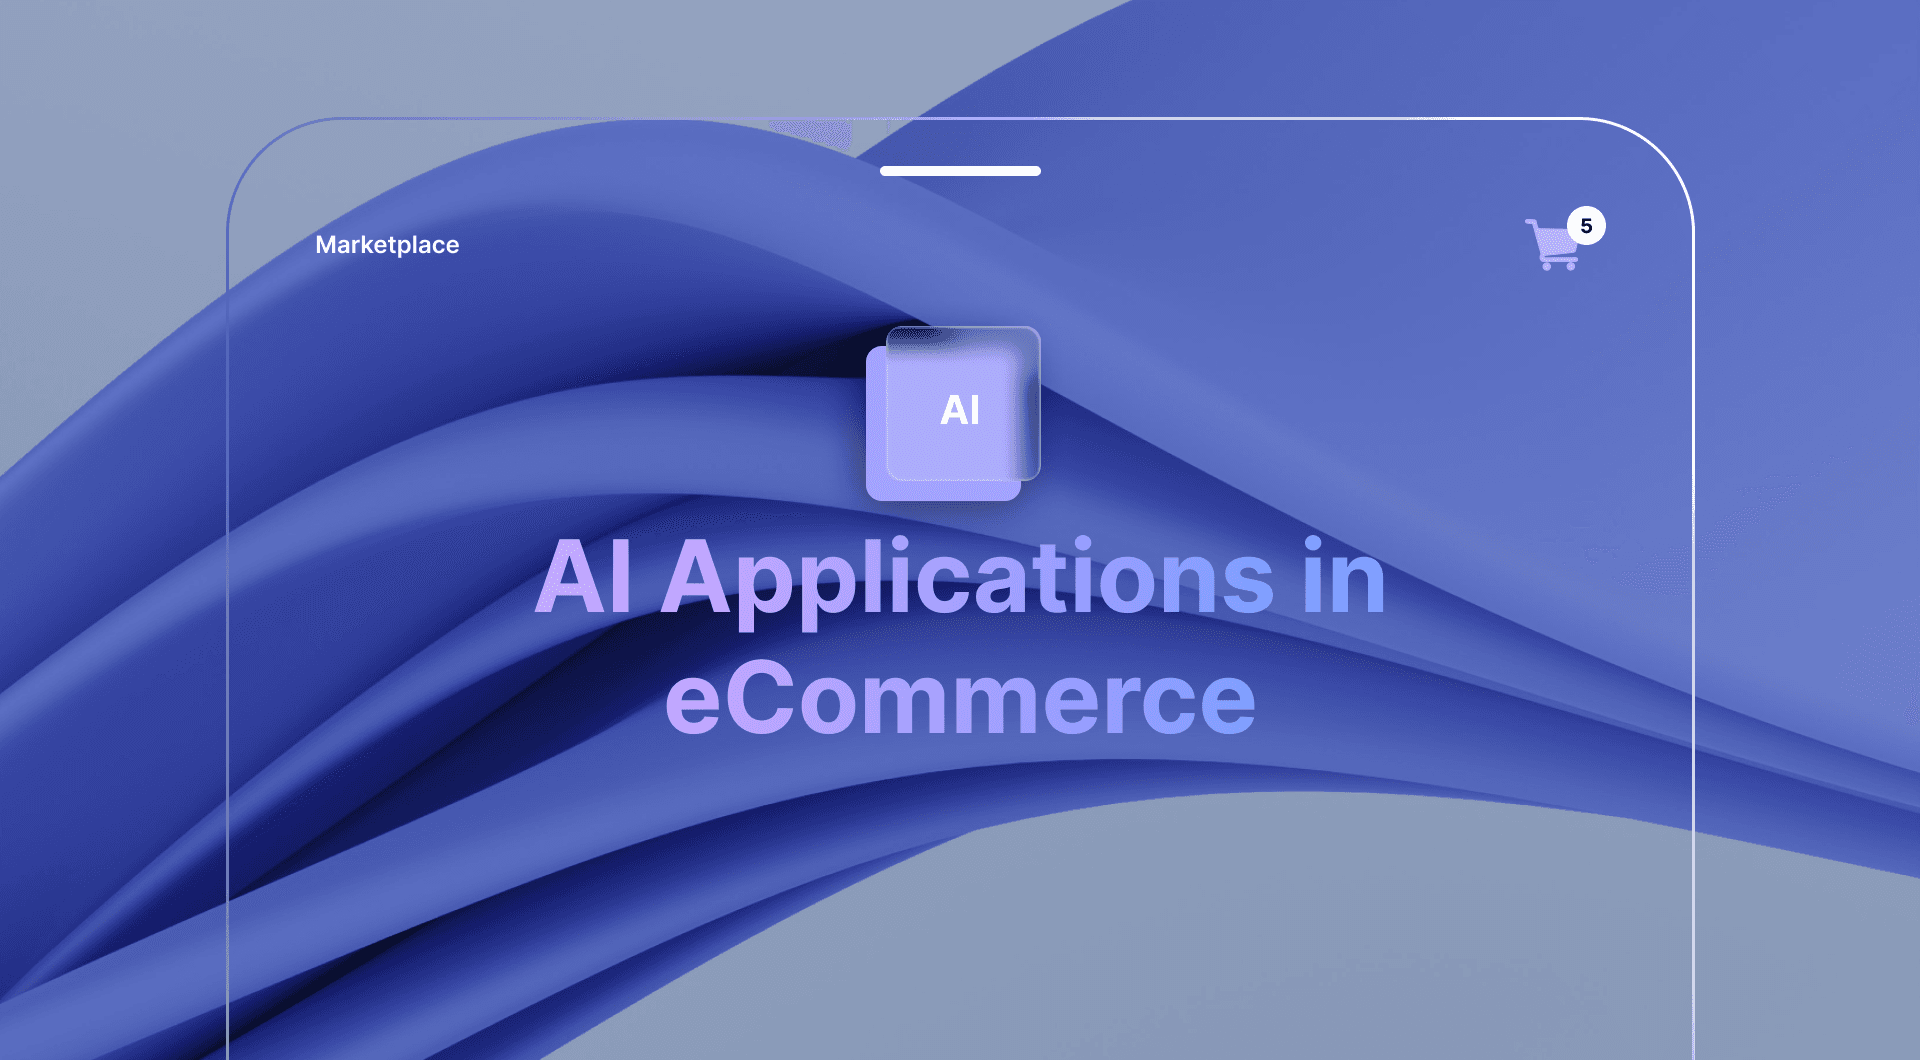 Picture for How eCommerce Businesses Apply AI: Use Cases, Gains and Challenges article